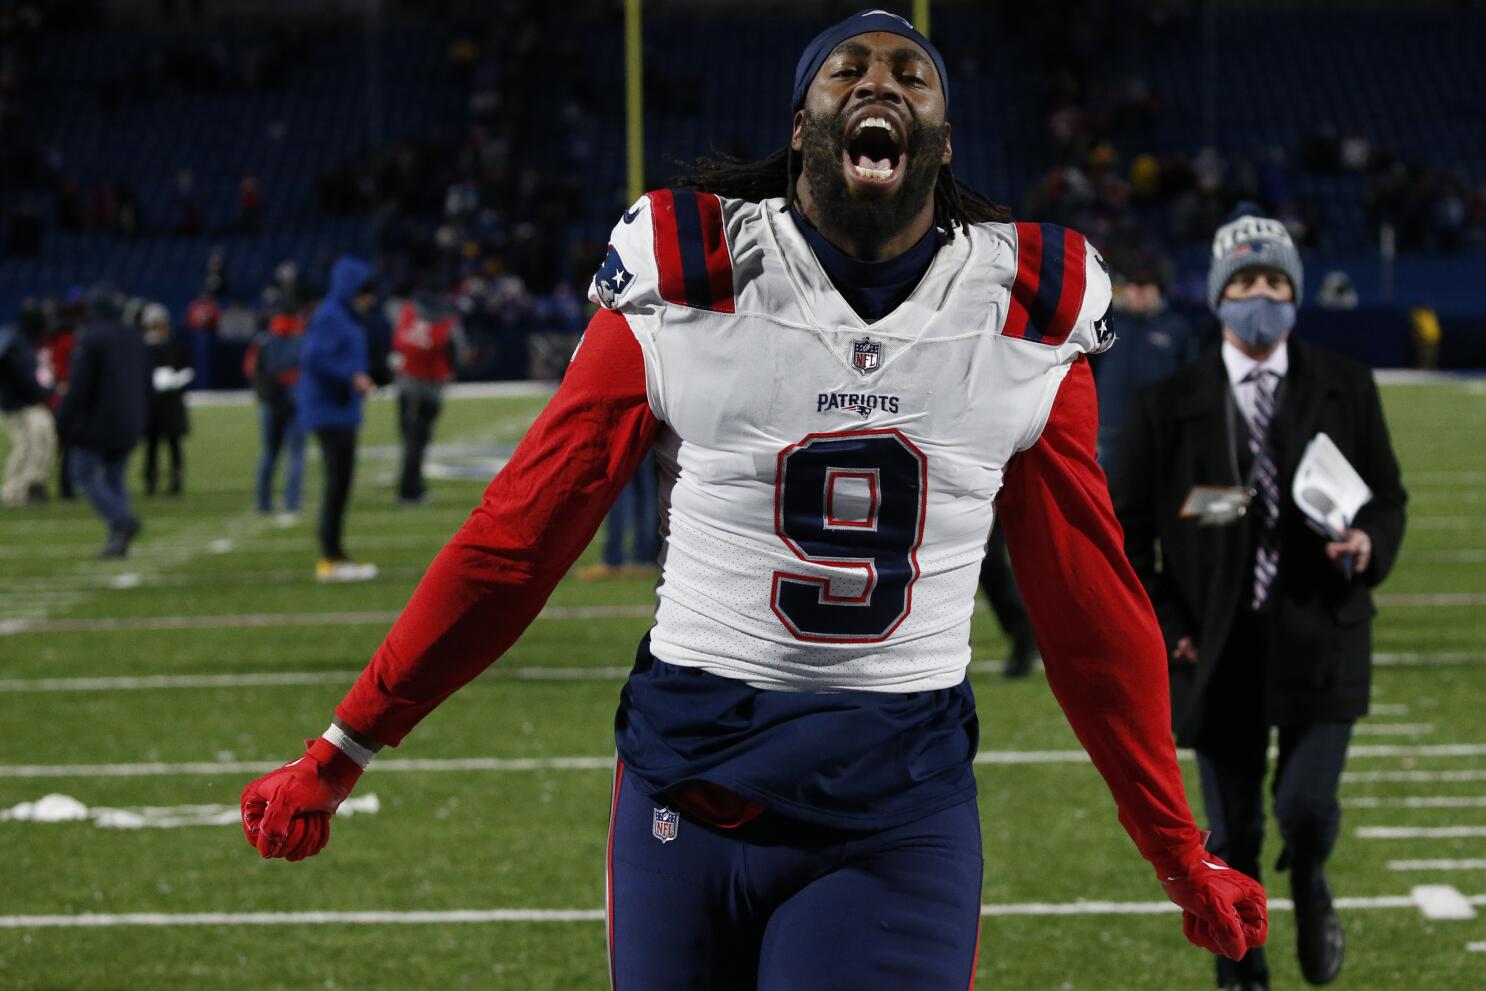 Judon focused on being himself heading into Year 2 with Pats - The